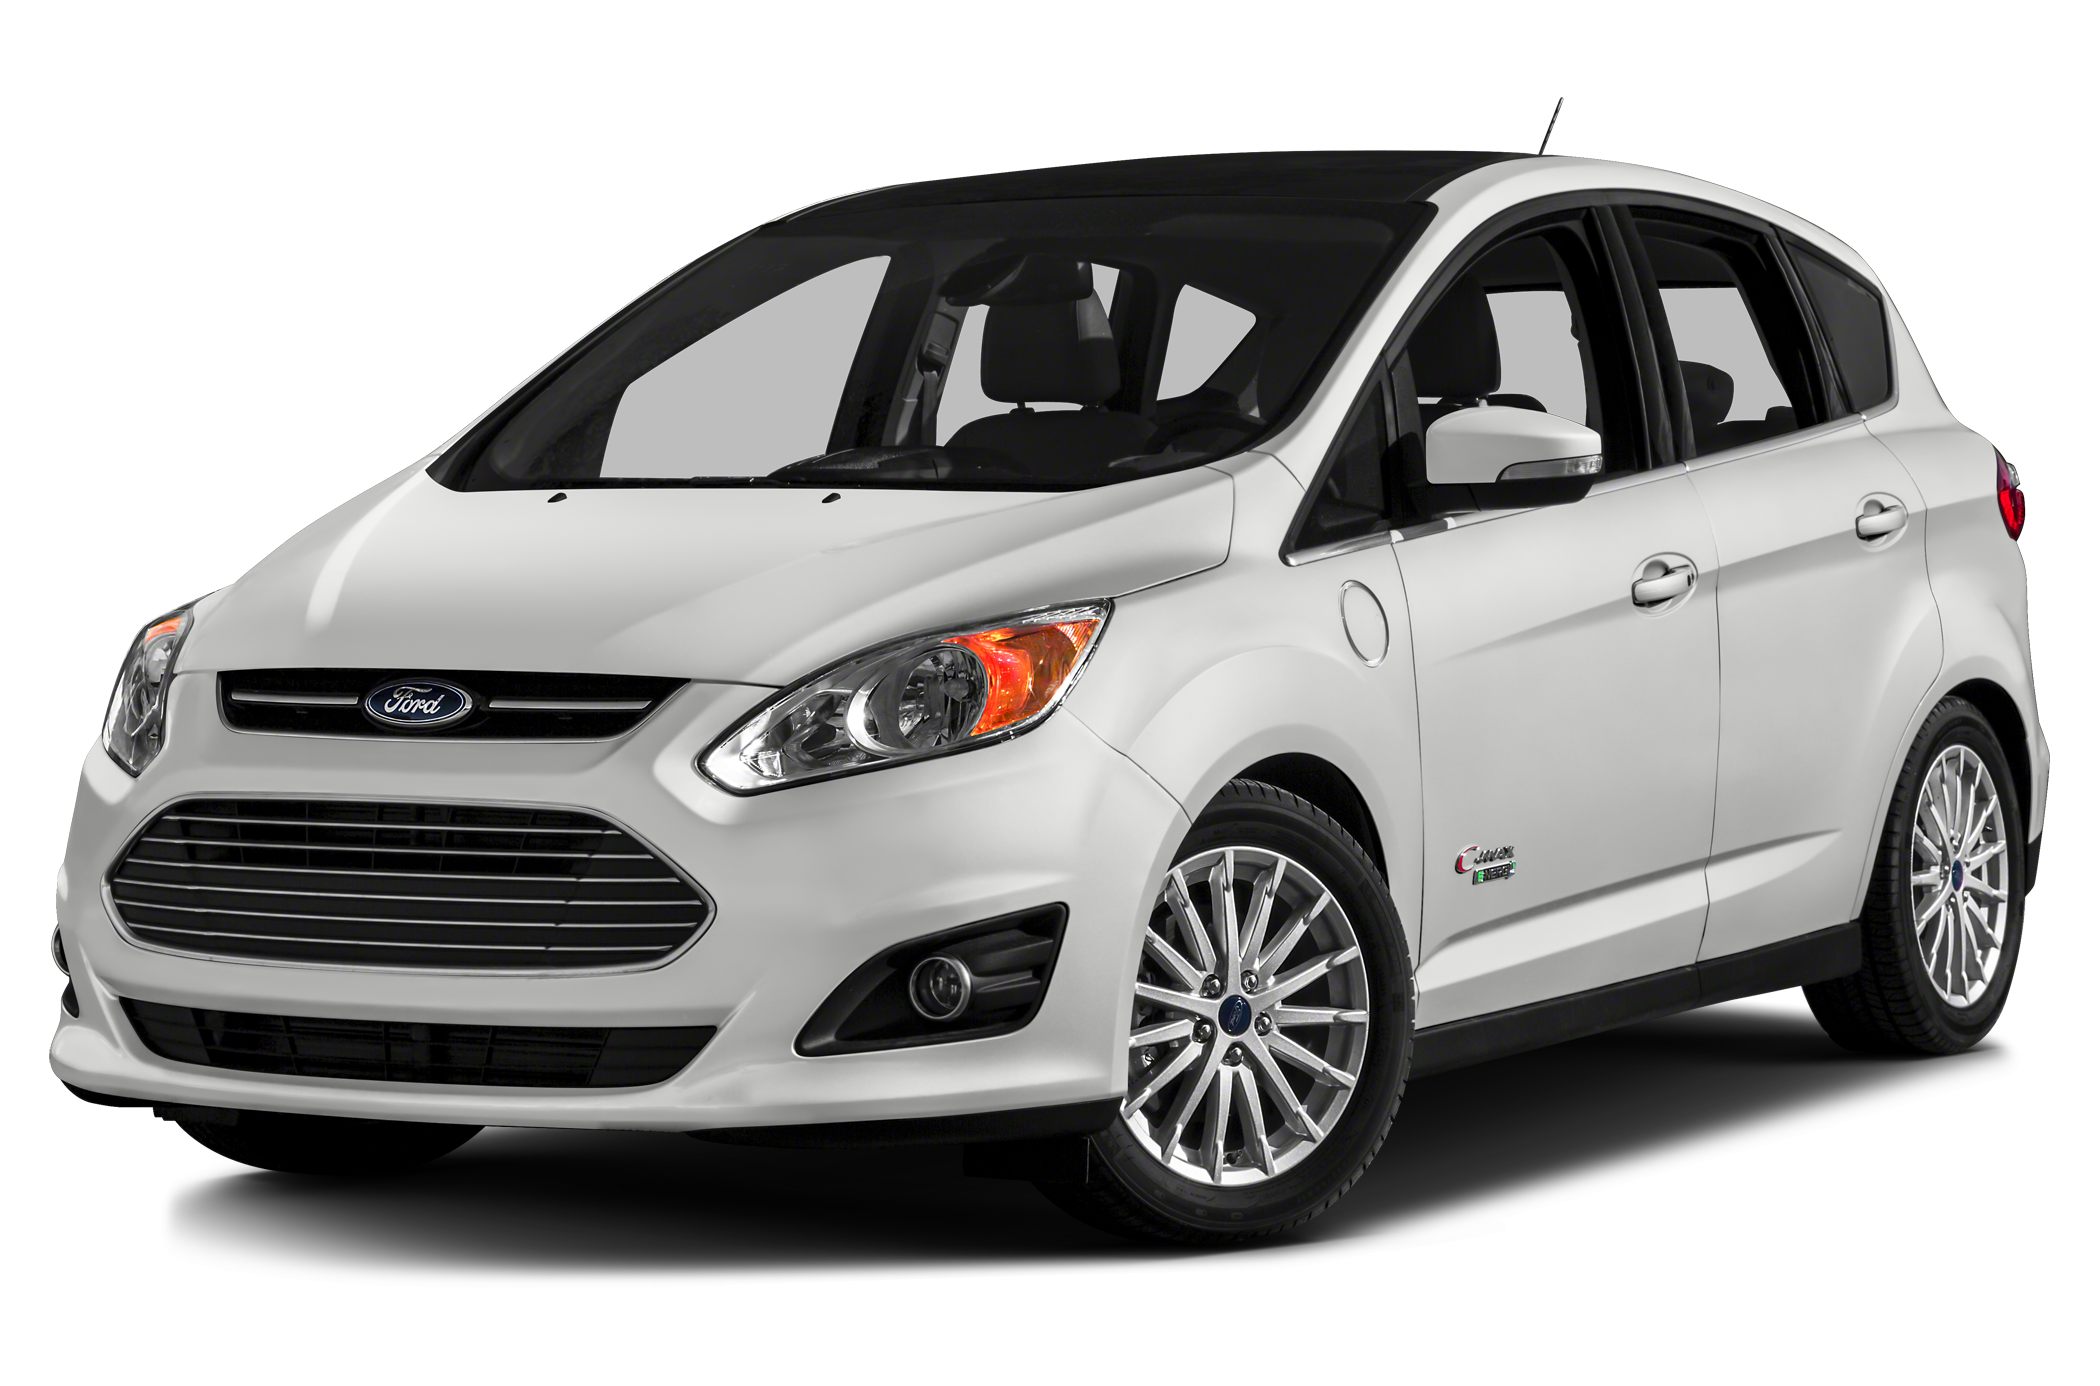 2017 Ford CMax Hybrid Deals, Prices, Incentives & Leases